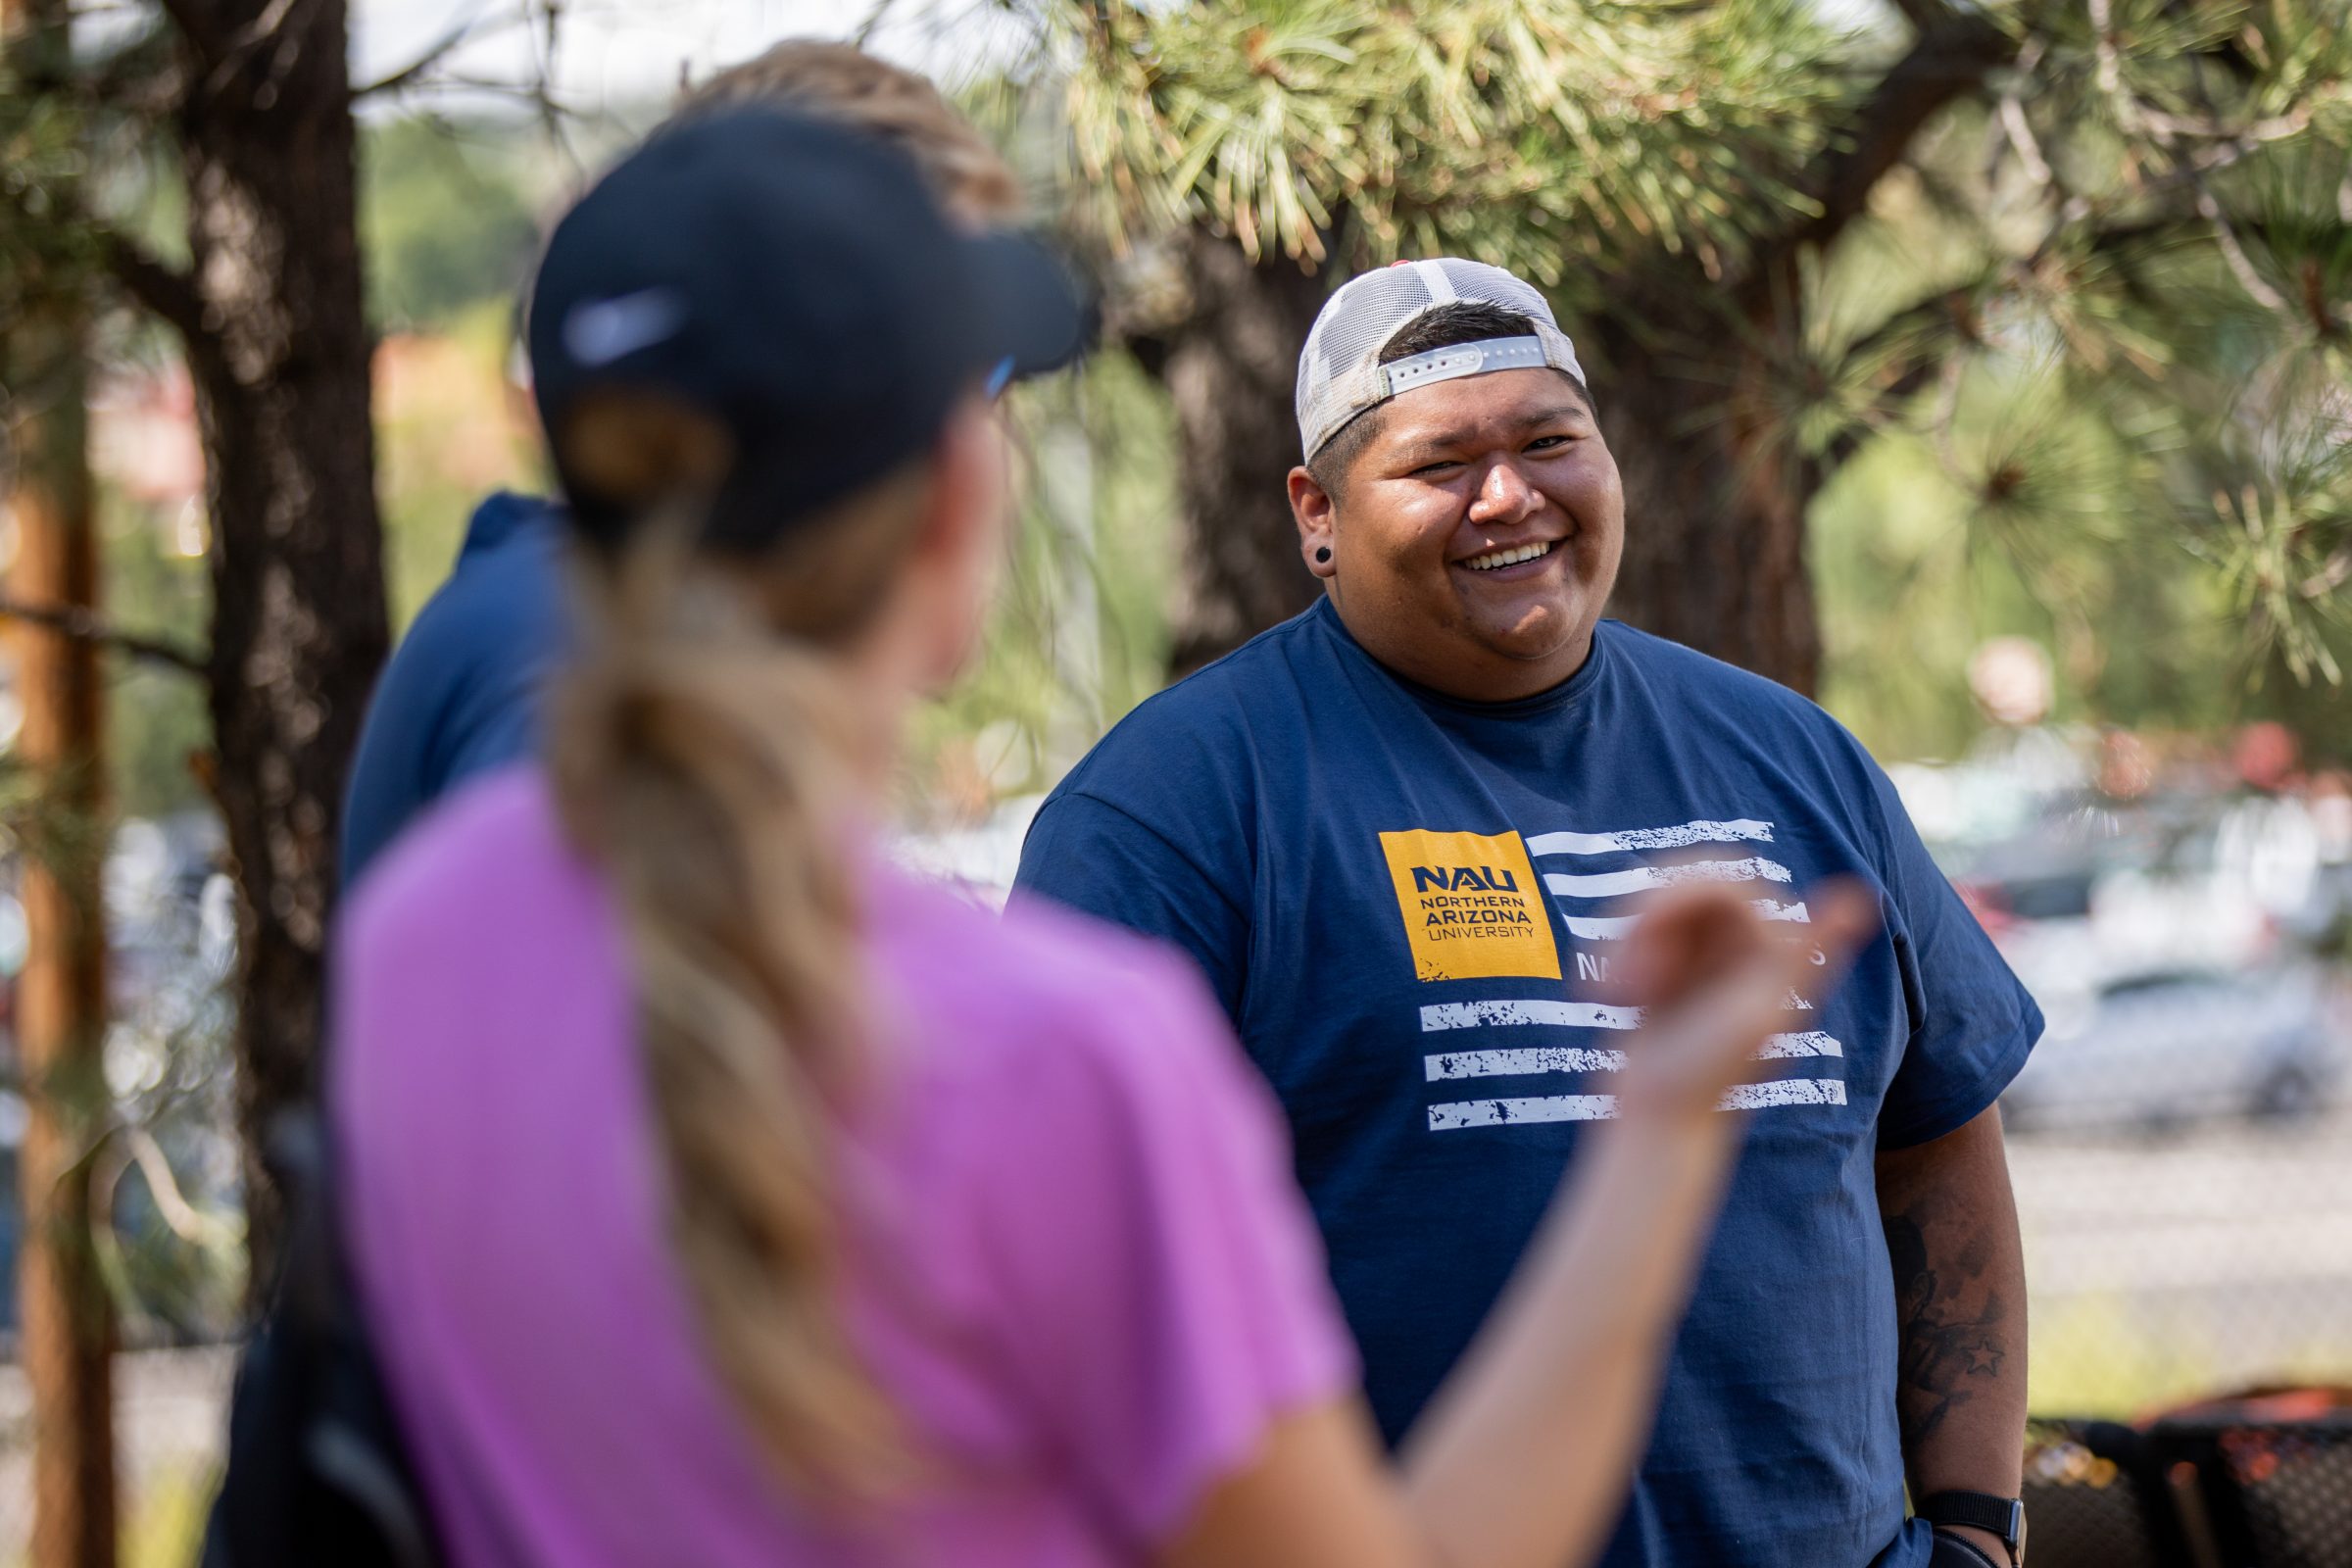 A student smiles while playing disc golf in Flagstaff